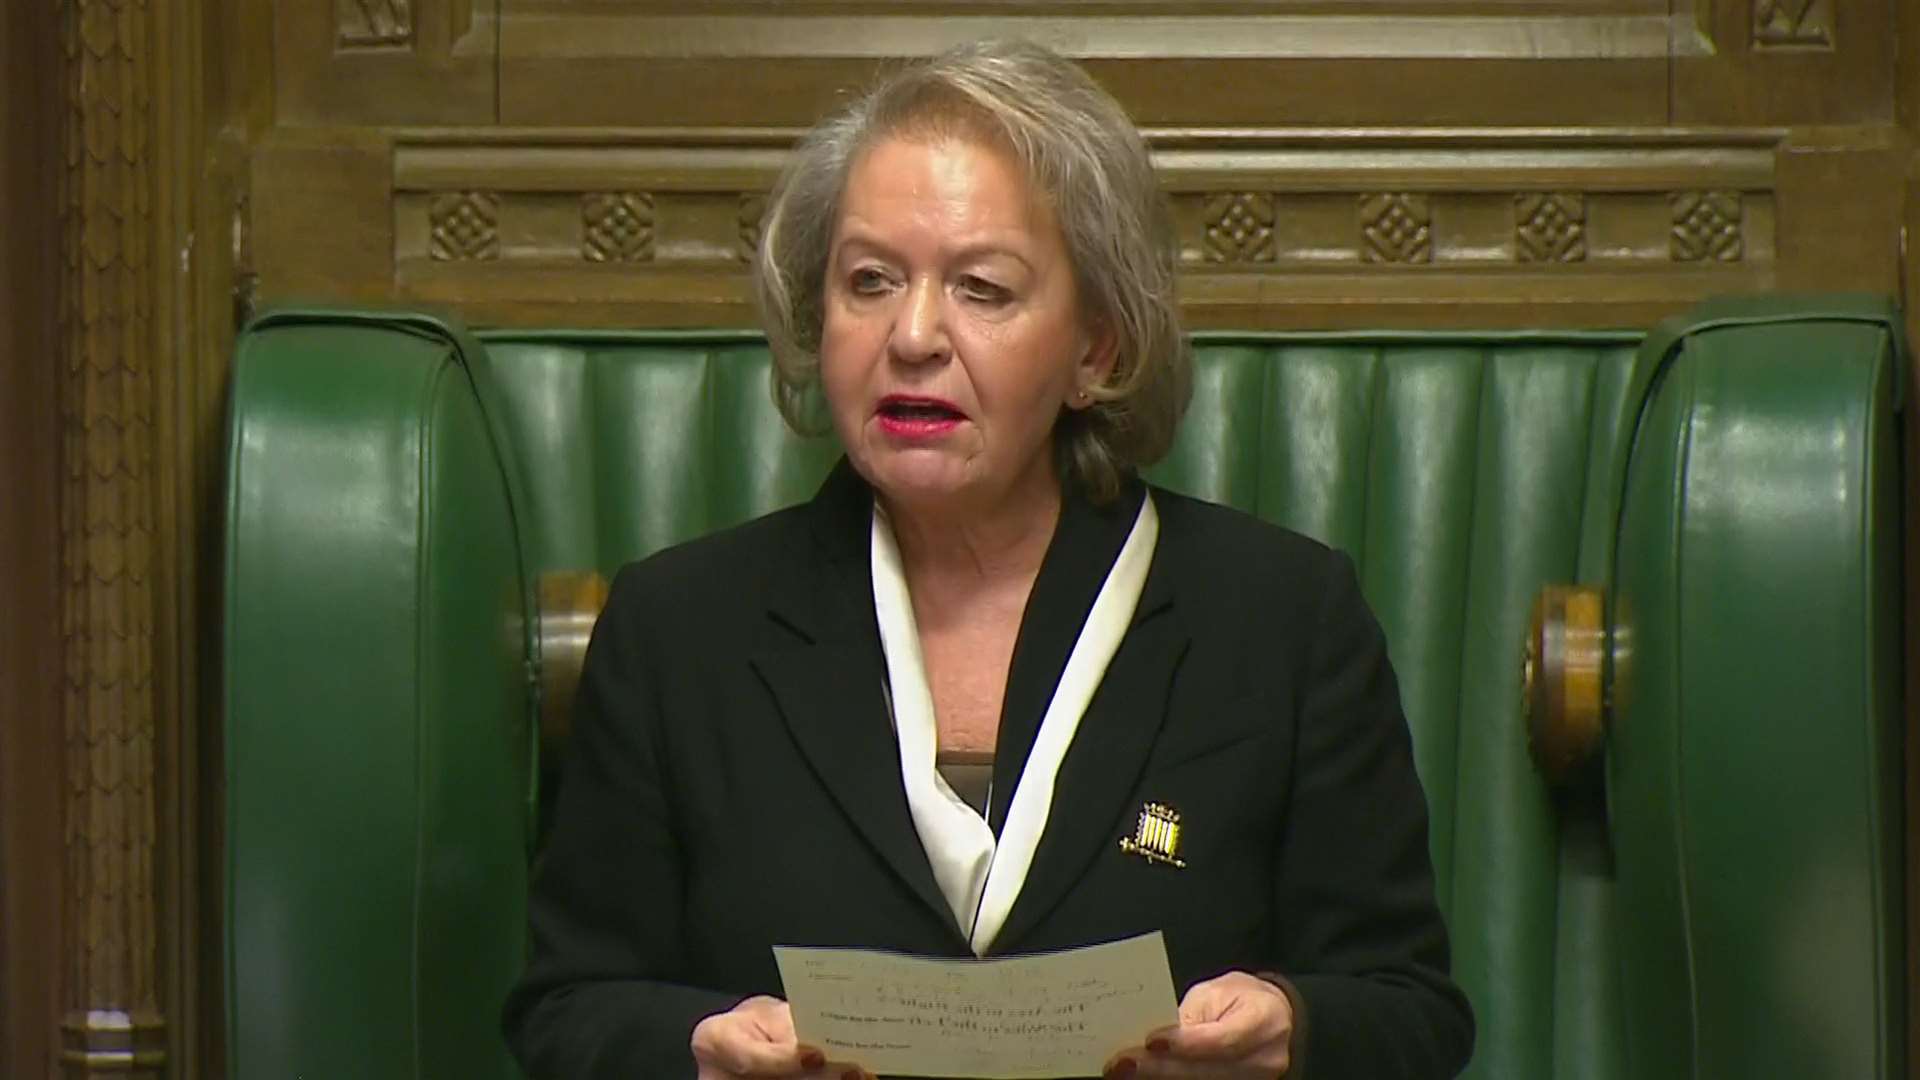 Deputy Speaker Dame Rosie Winterton reads out the vote result (House of Commons/UK Parliament/PA)